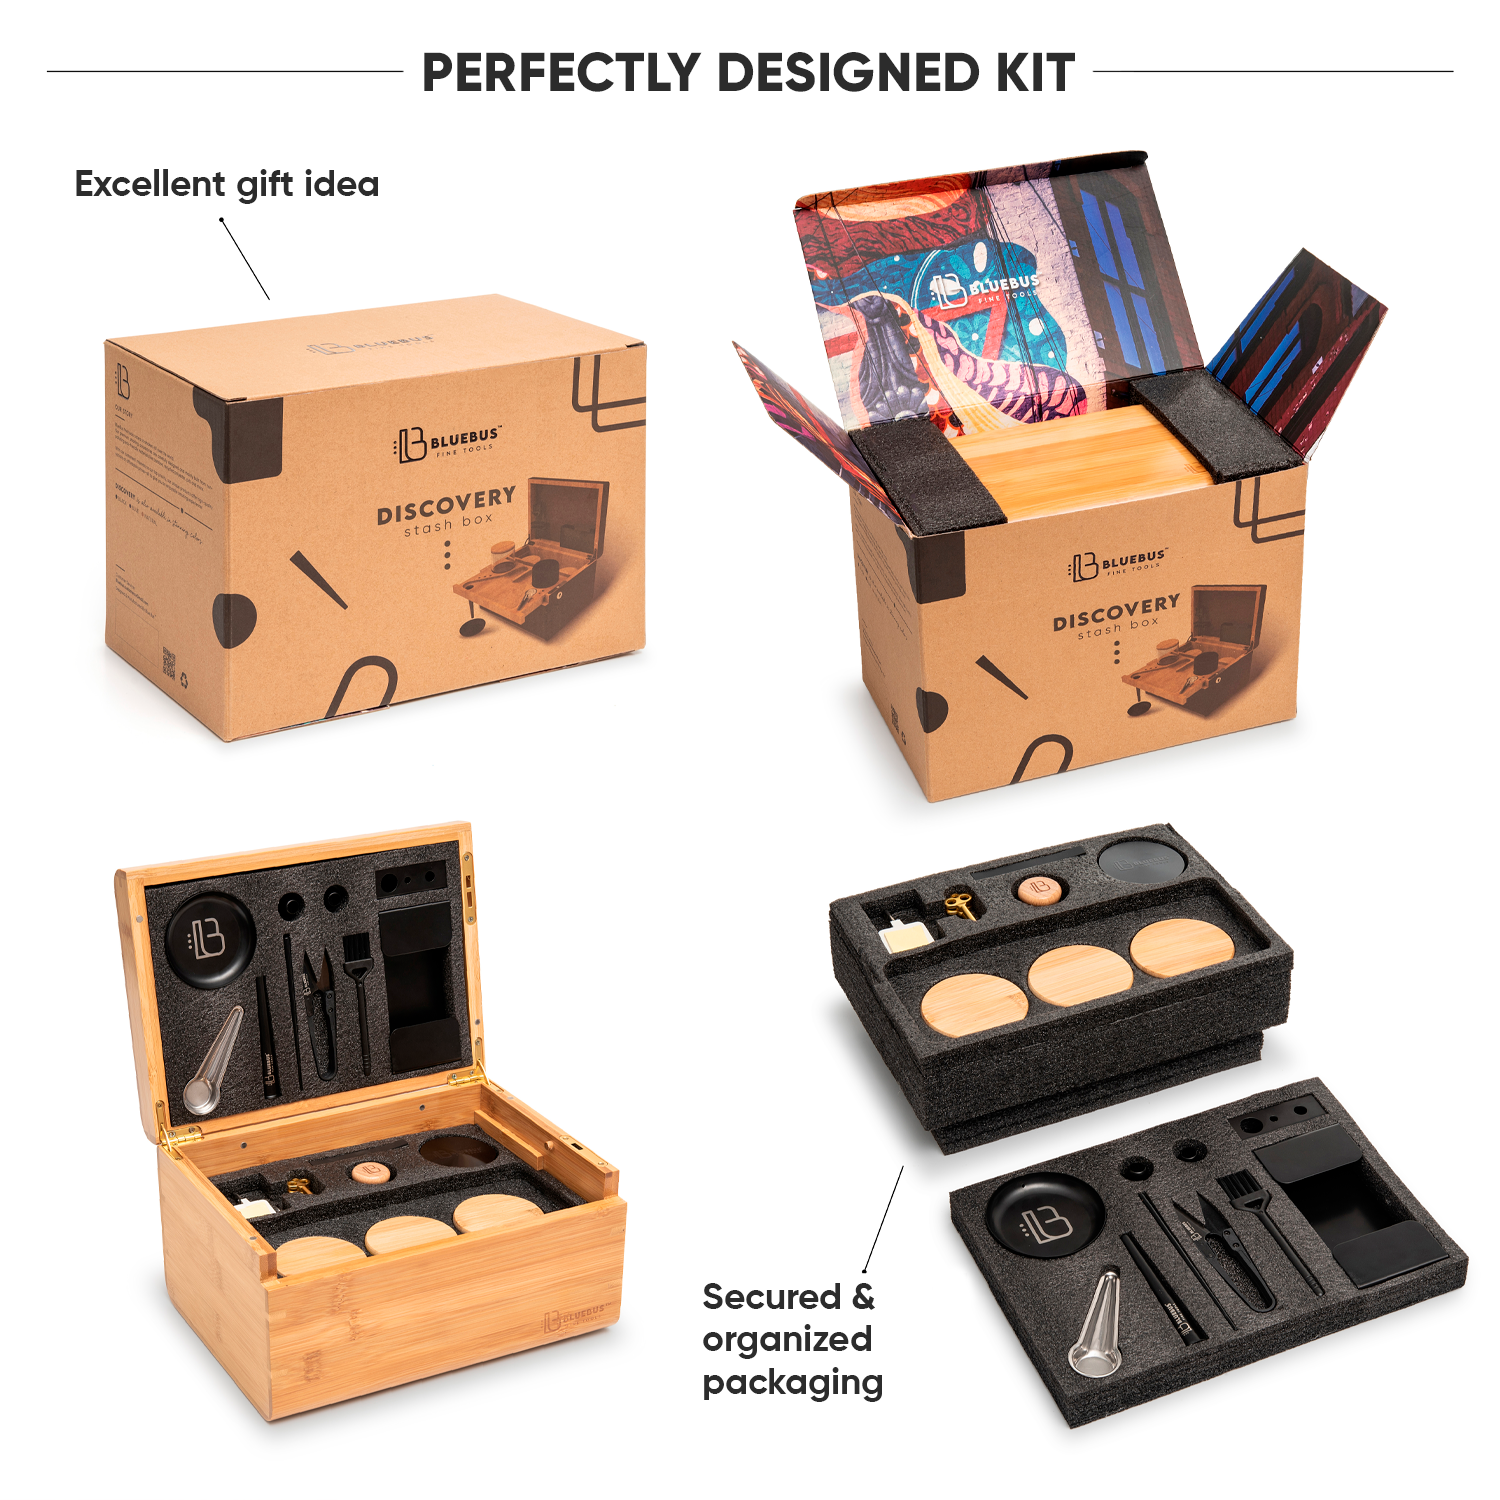 DISCOVERY Storage Box Black (ONLINE ONLY)